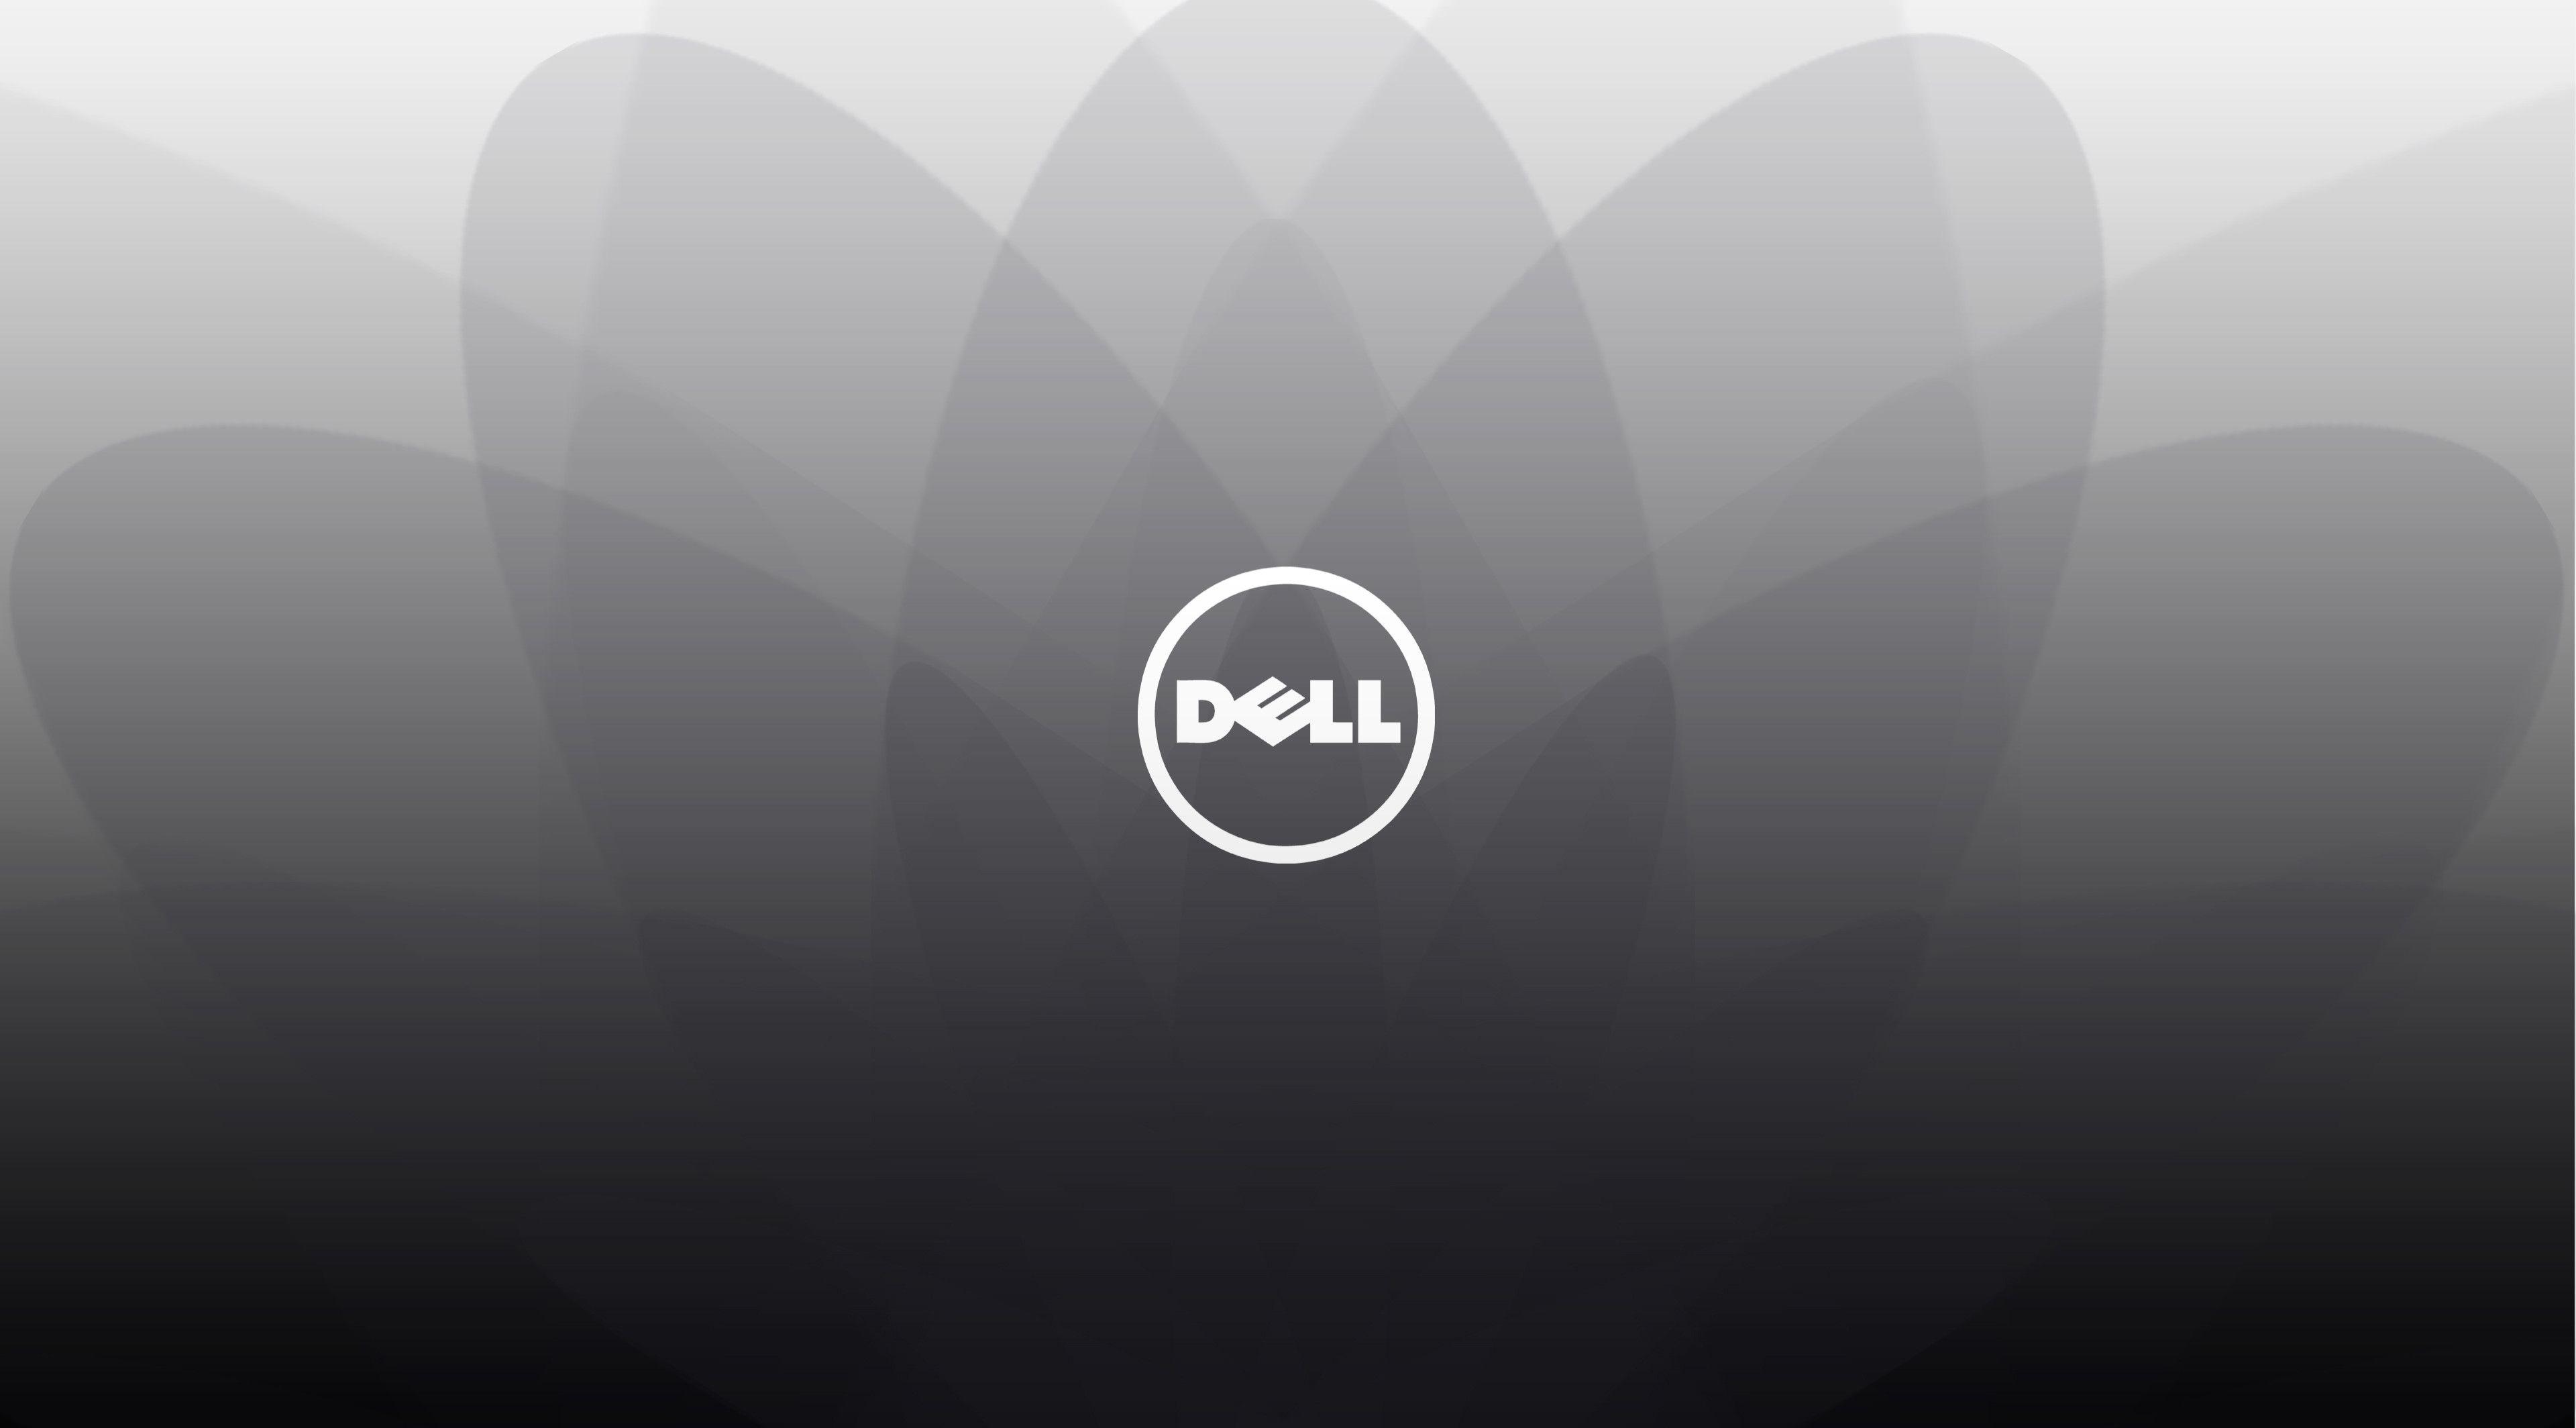  Dell  4K  Wallpapers  Top Free Dell  4K  Backgrounds  